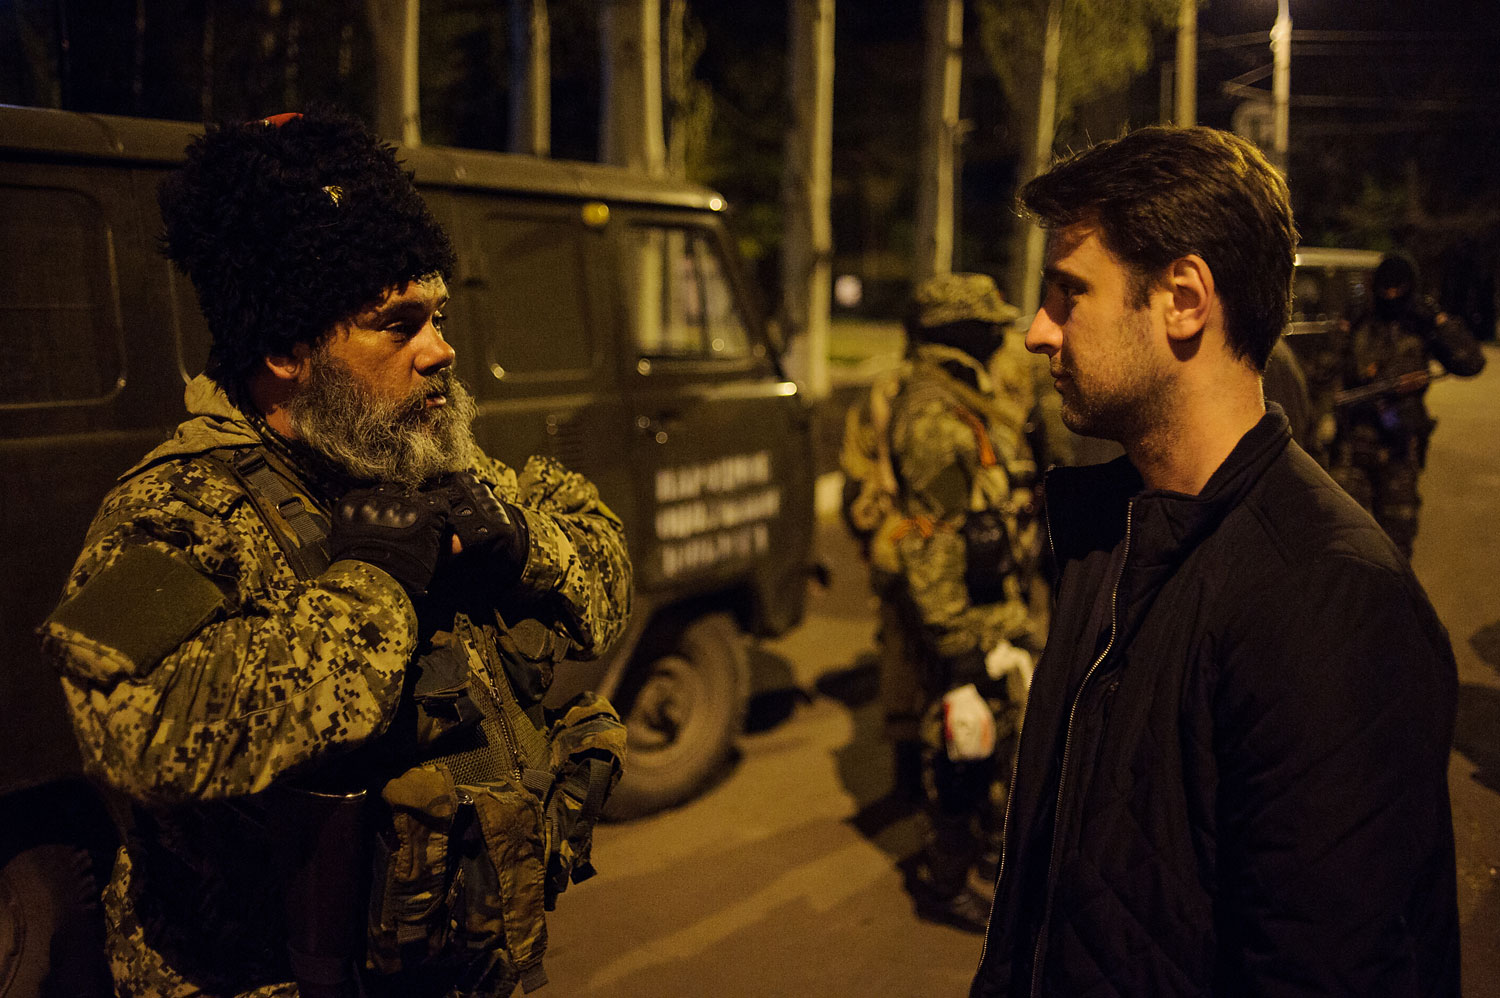 Mozhaev talks with TIME's Berlin Correspondent, Simon Shuster, in the town of Kramatorsk on April 21.